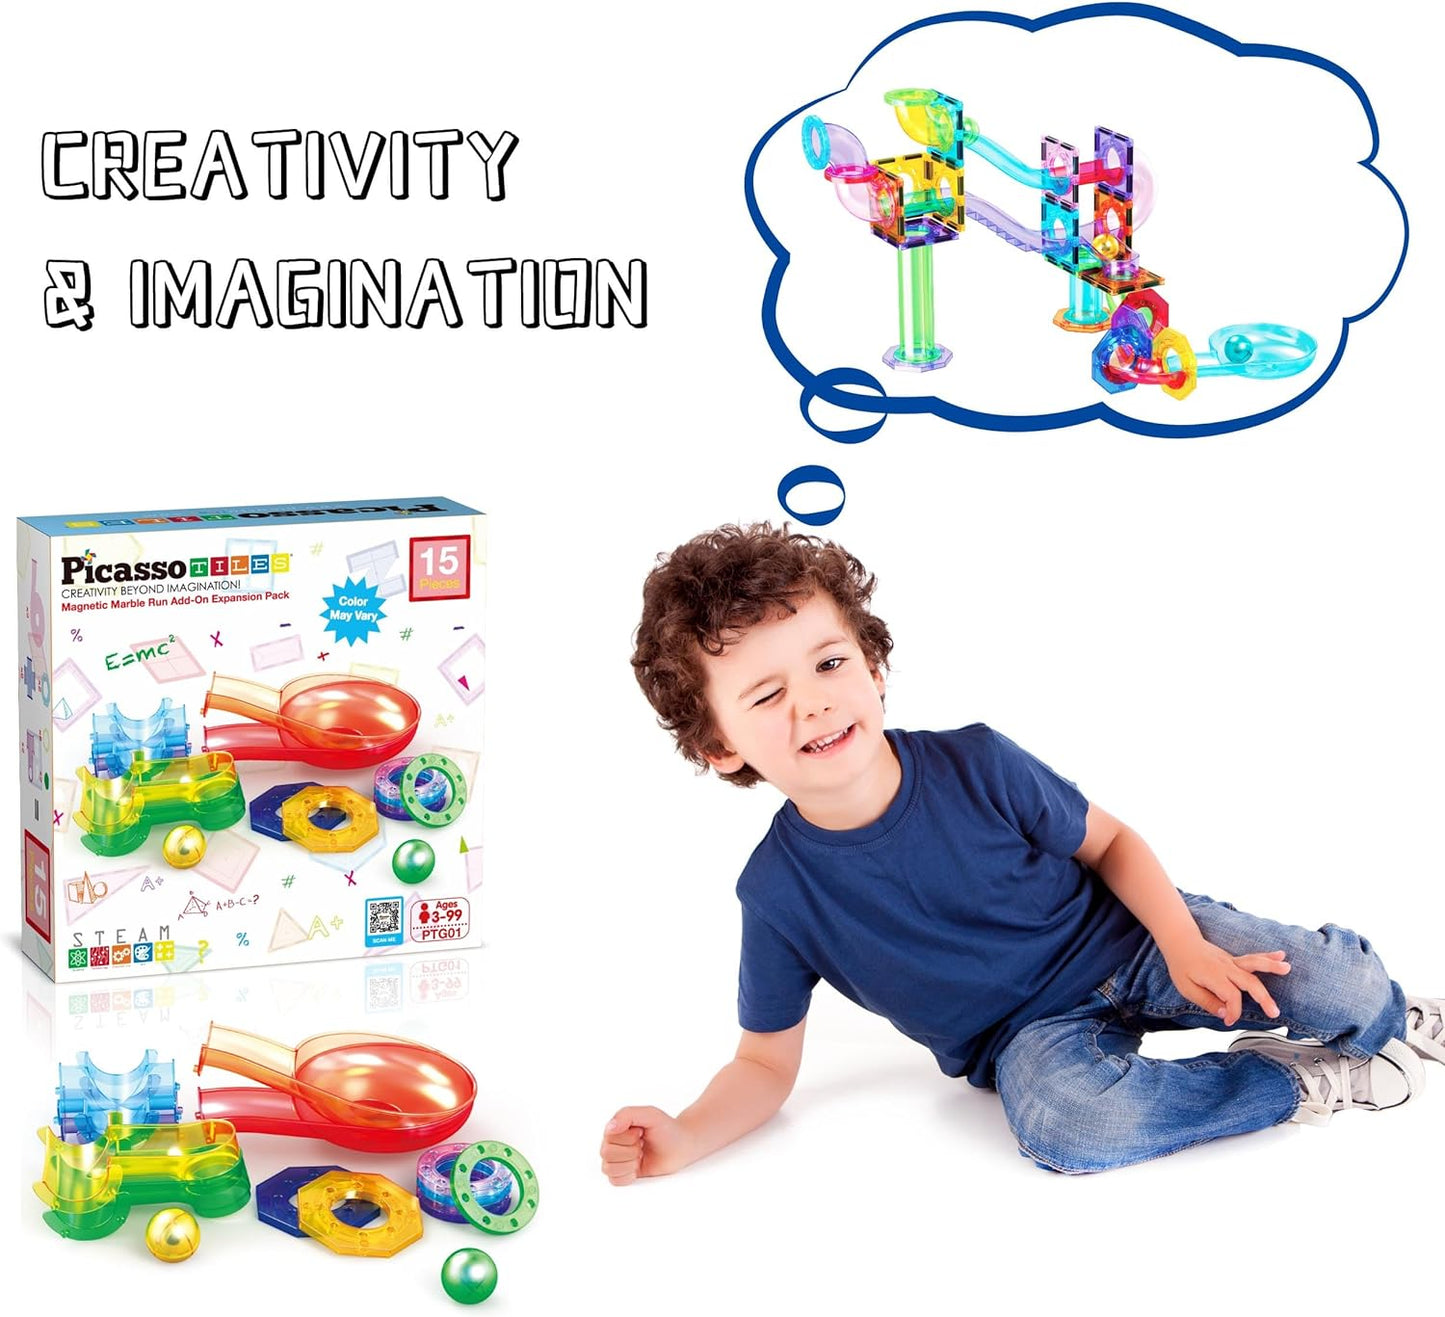 PicassoTiles 15pc Magnetic Marble Run Add-On Expansion